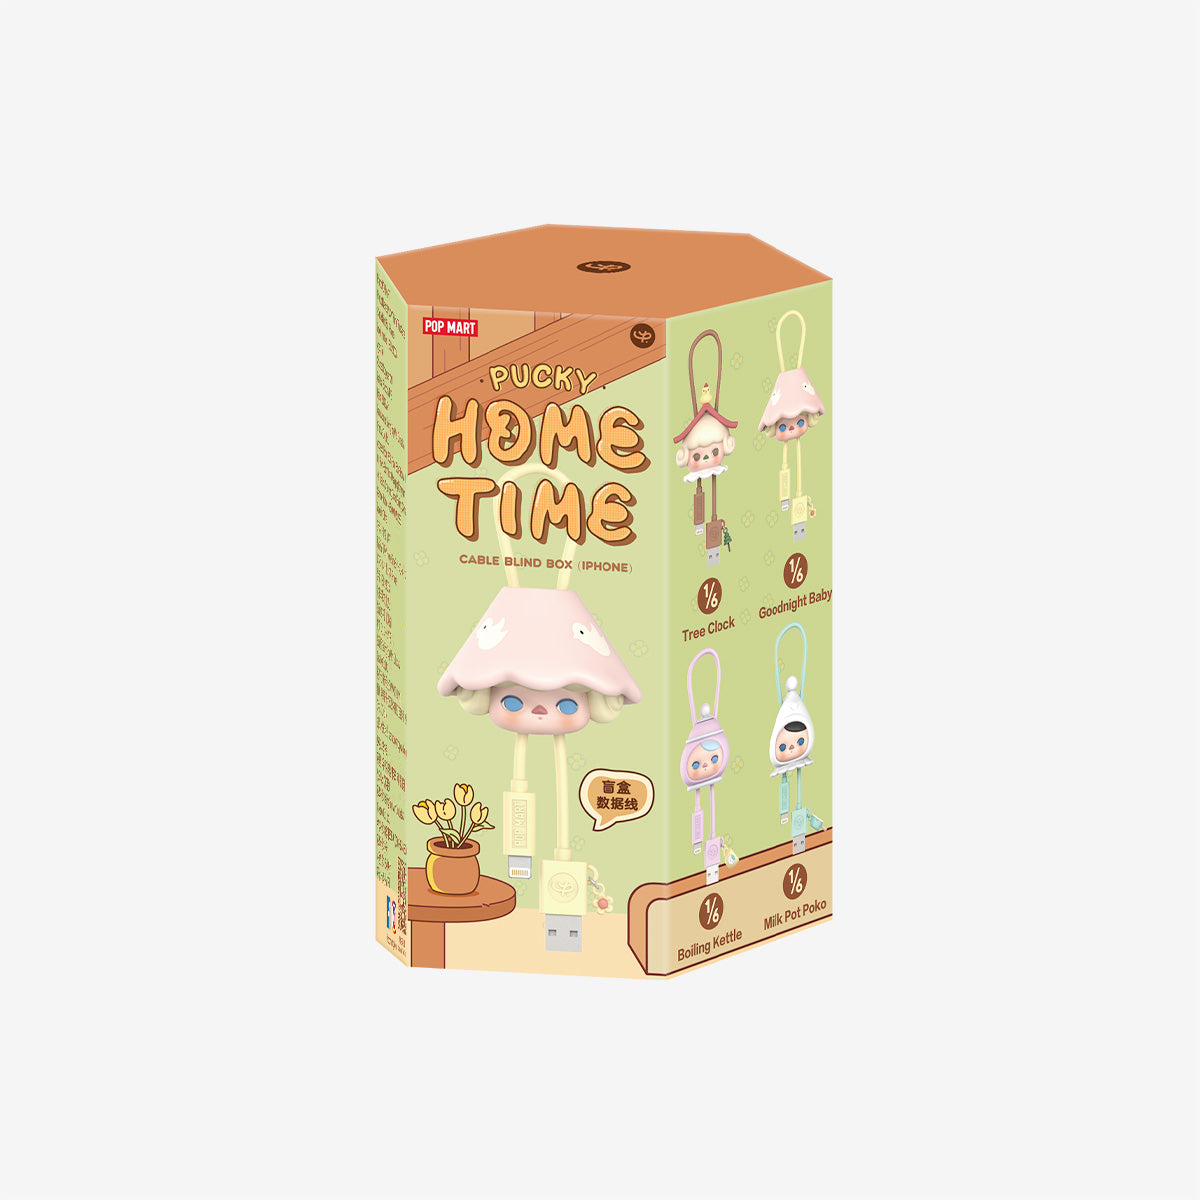 【New】Pop Mart Pucky Home Time Series Cable Blind Box (iPhone-Lighting)